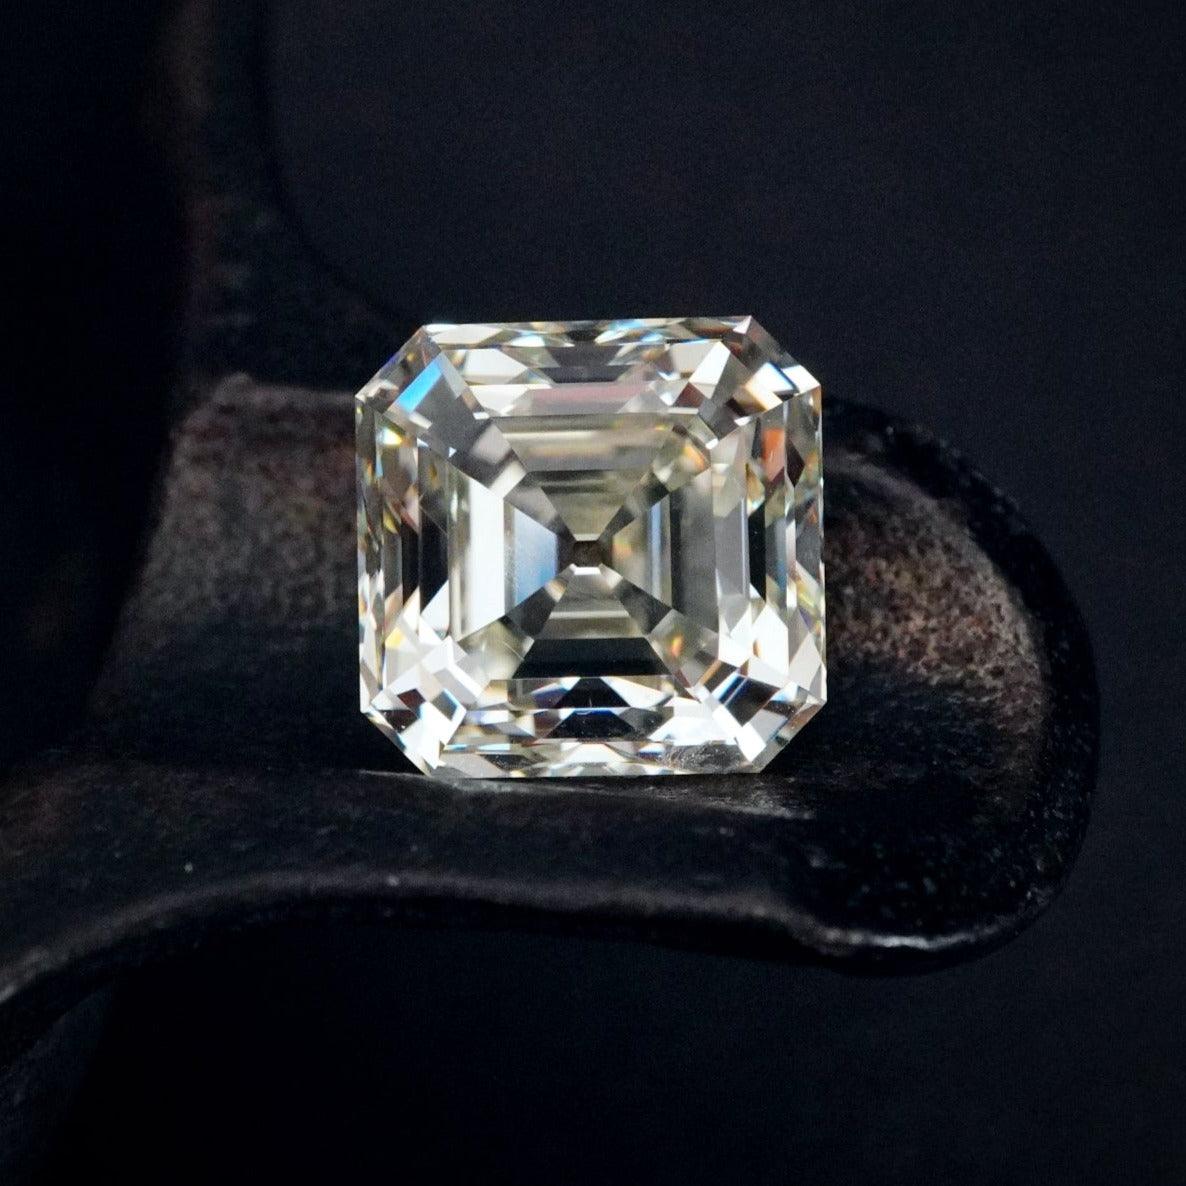 Exceptional 7.38-CT Art Deco Diamond with an Hypnotic